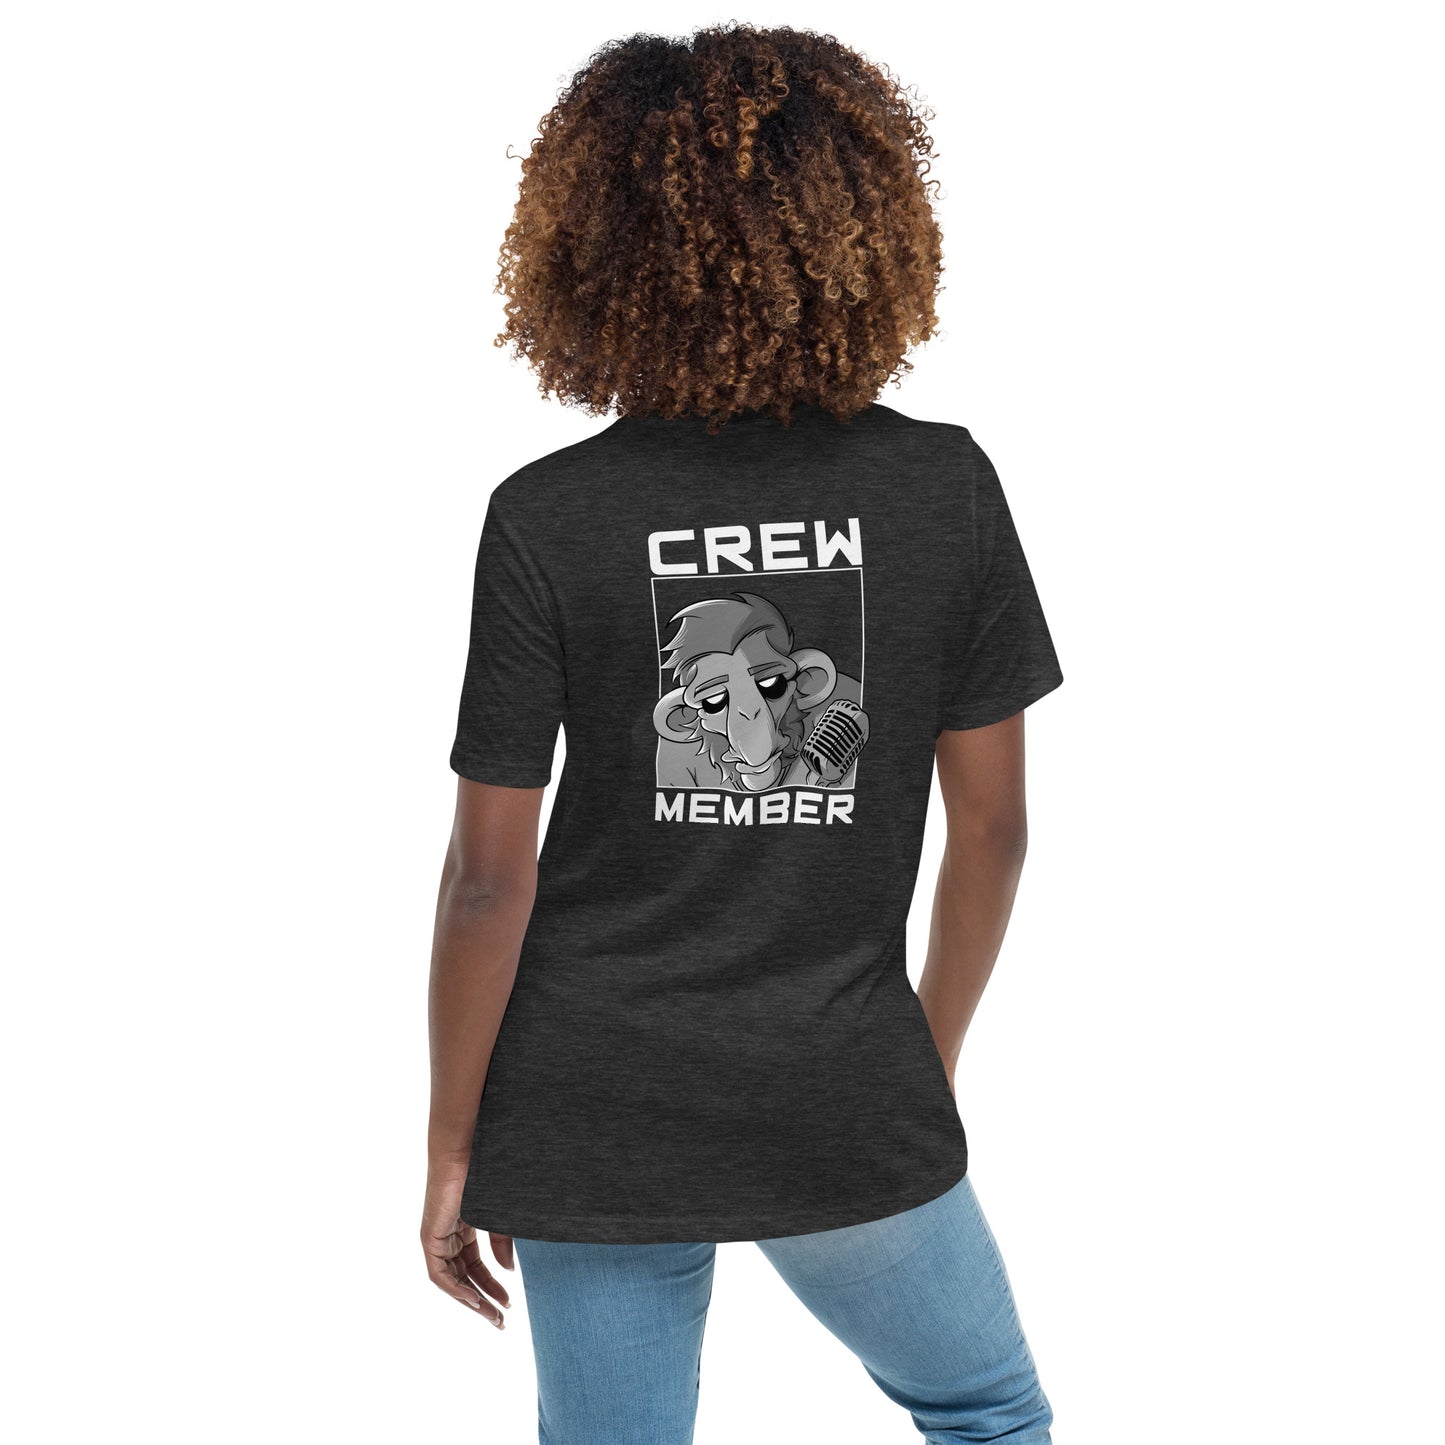 The Gig Crew Women's Relaxed T-Shirt